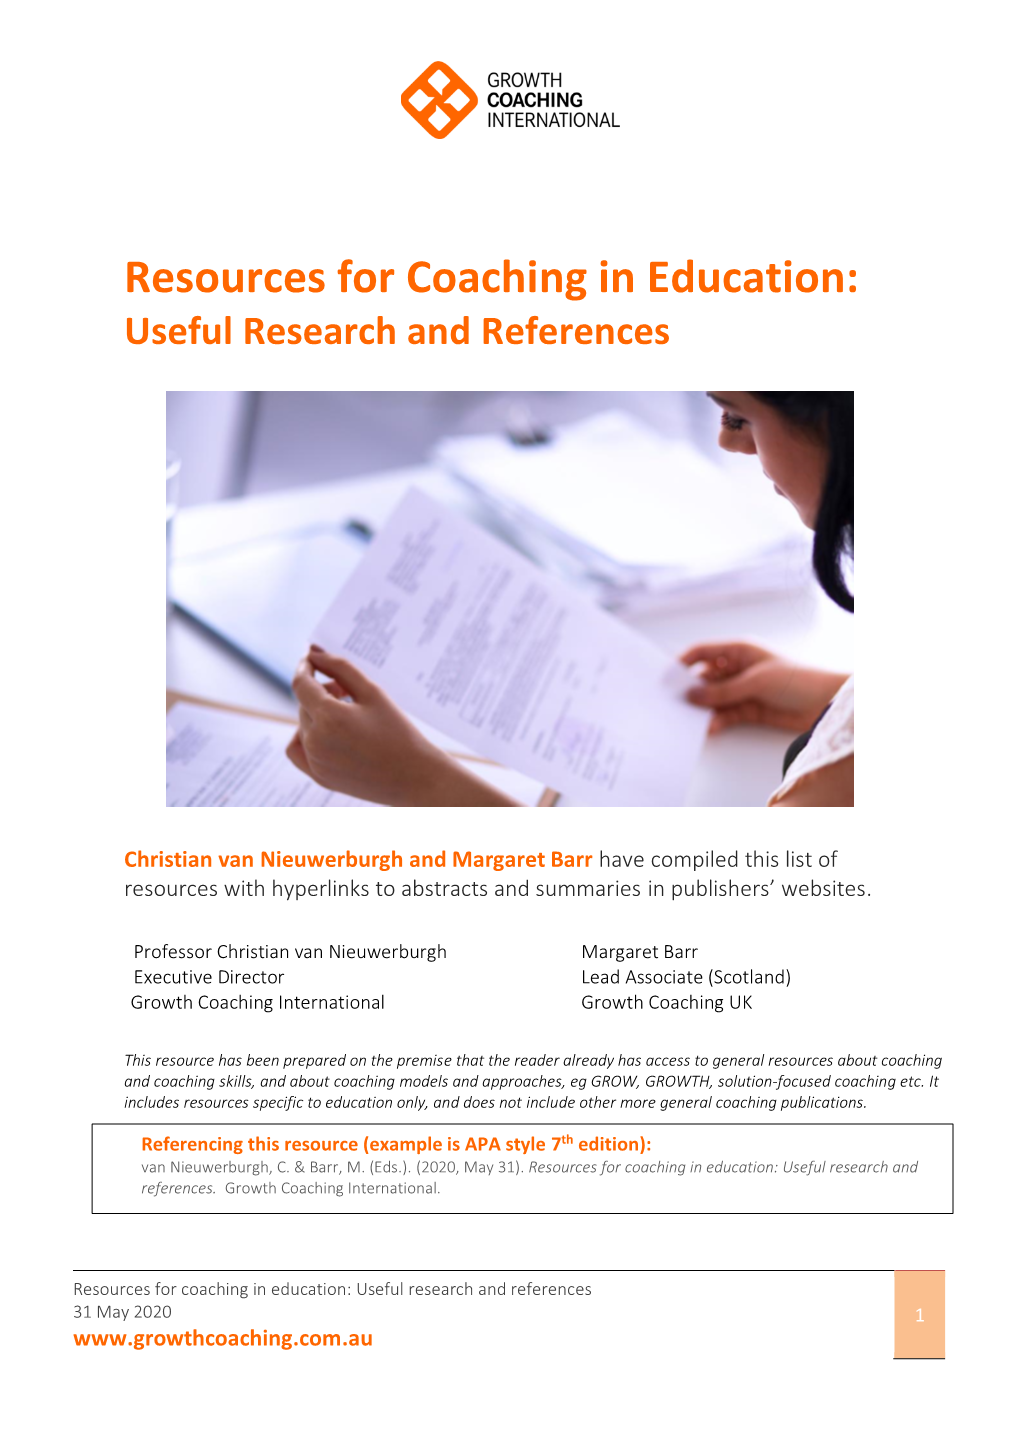 Resources for Coaching in Education: Useful Research and References